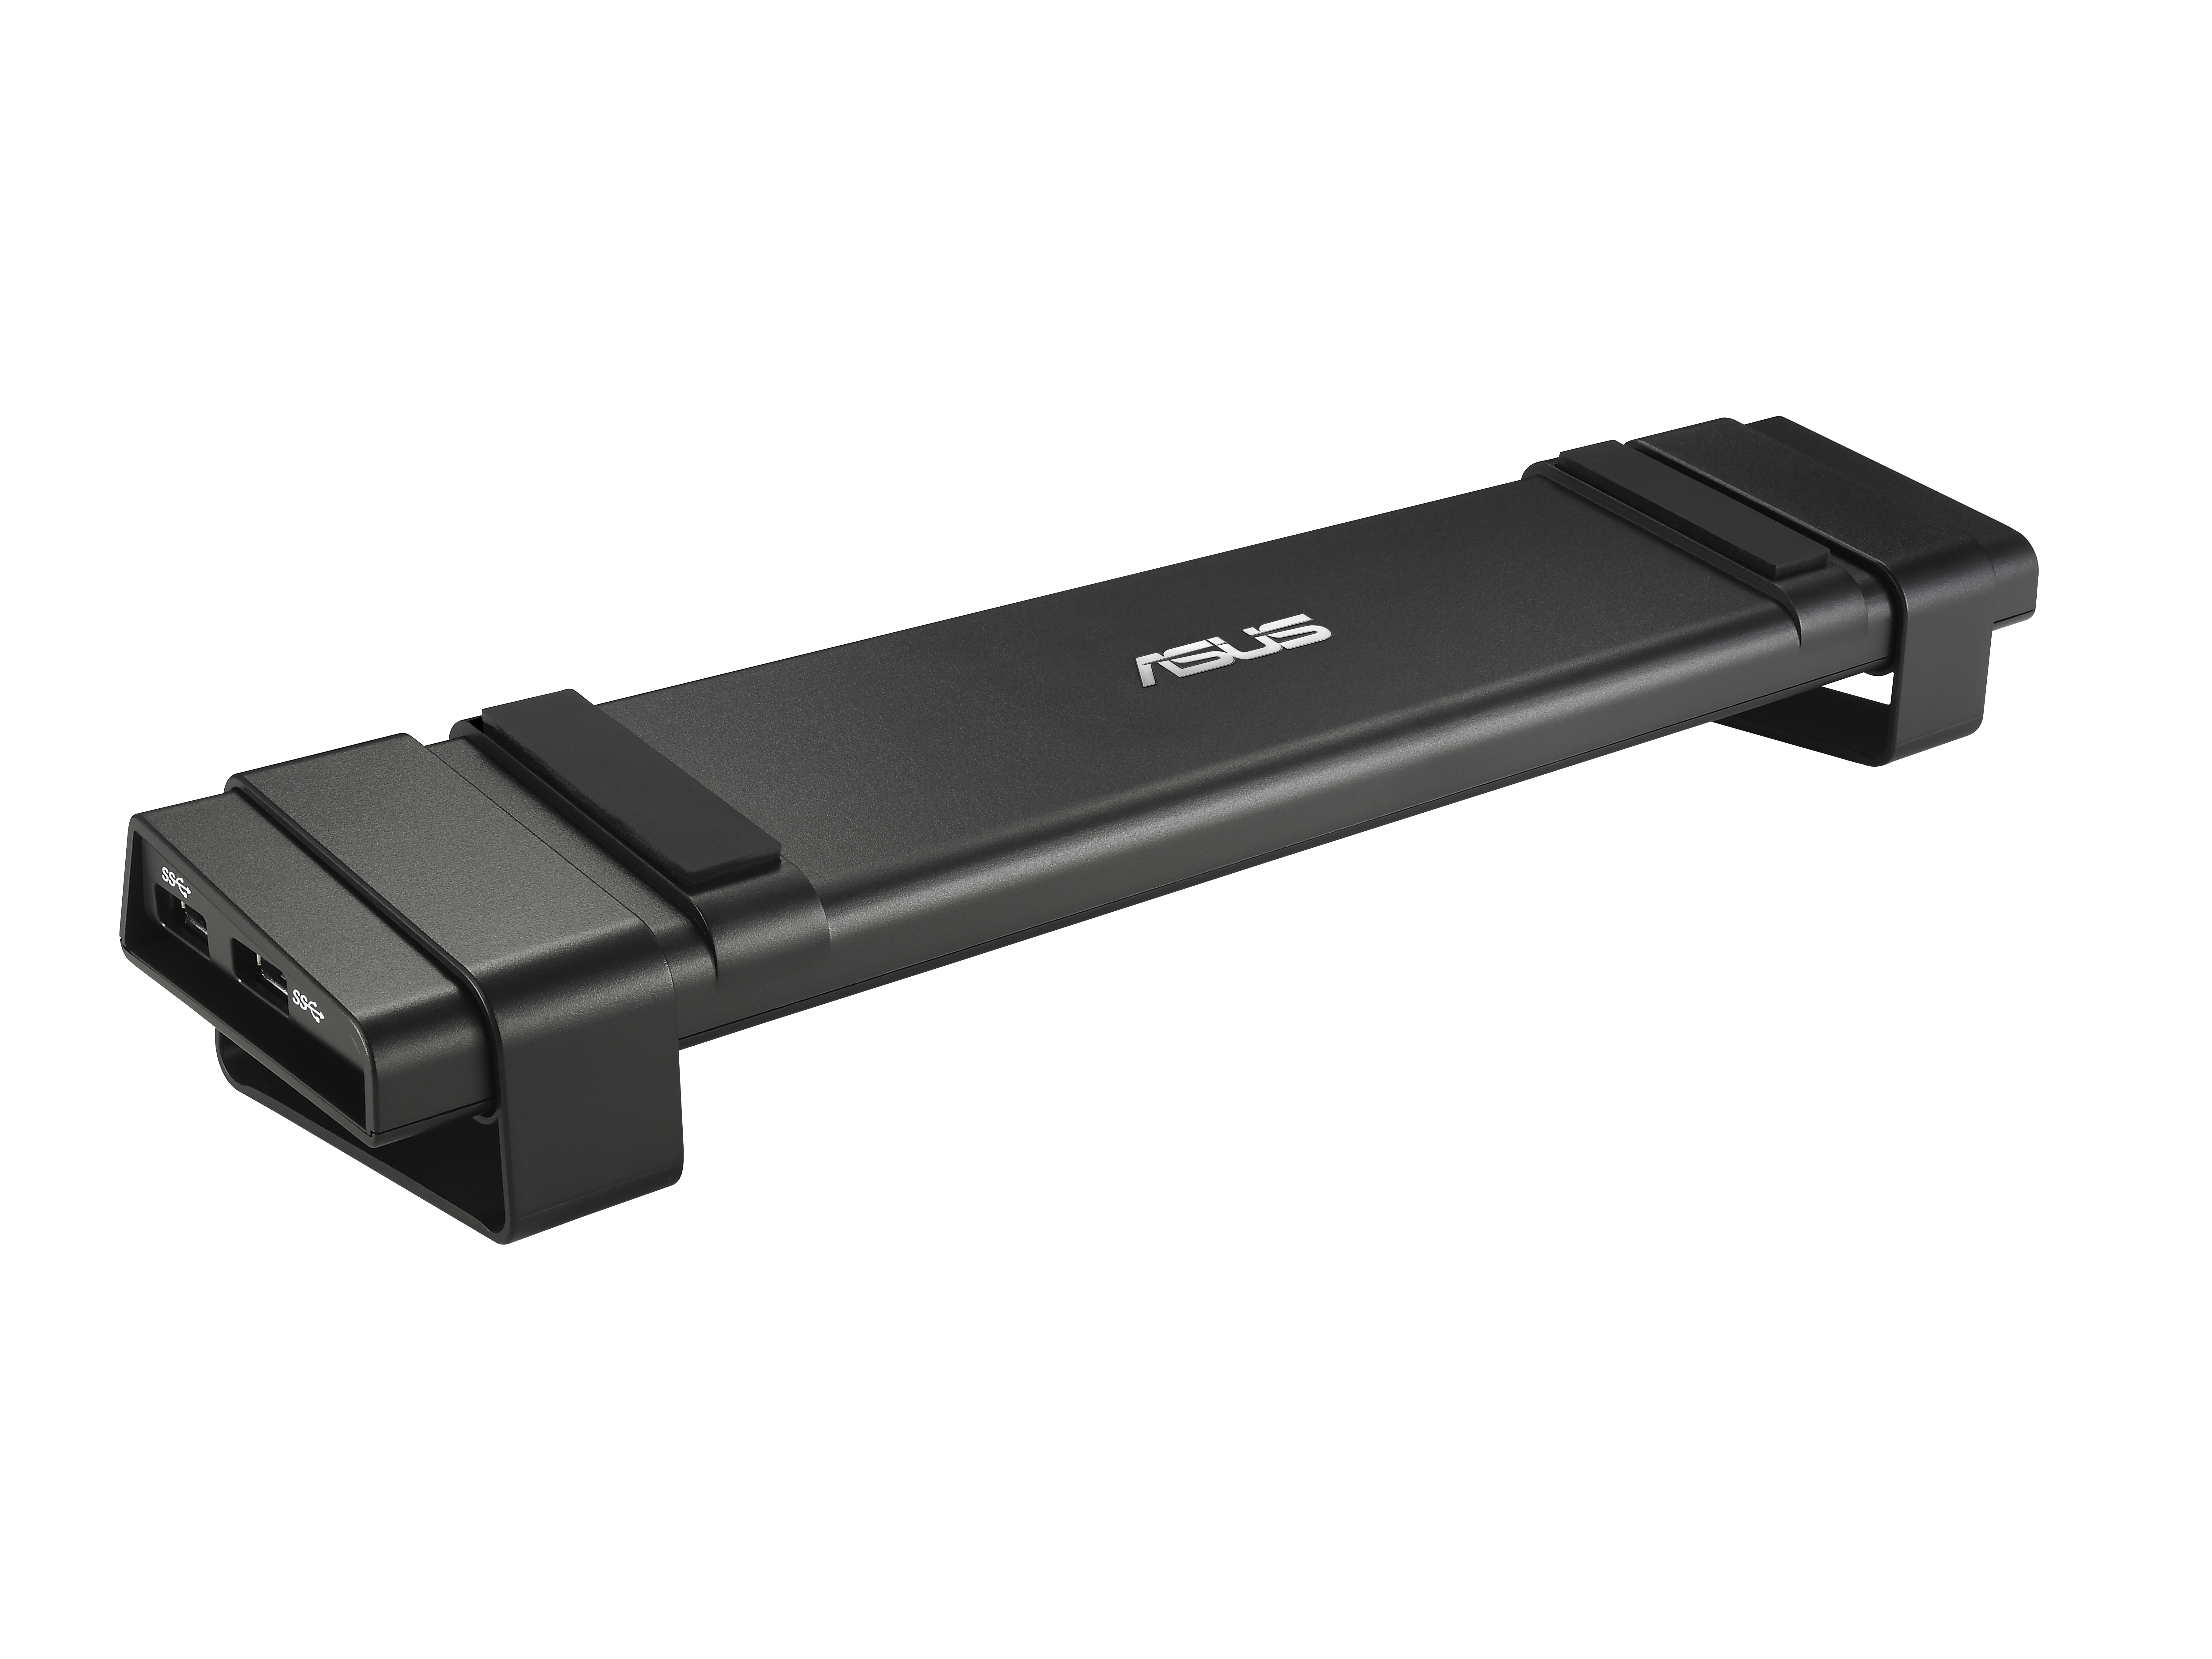 ASUS USB3.0_HZ-3A Plus Dongles and Cable｜ASUS USA